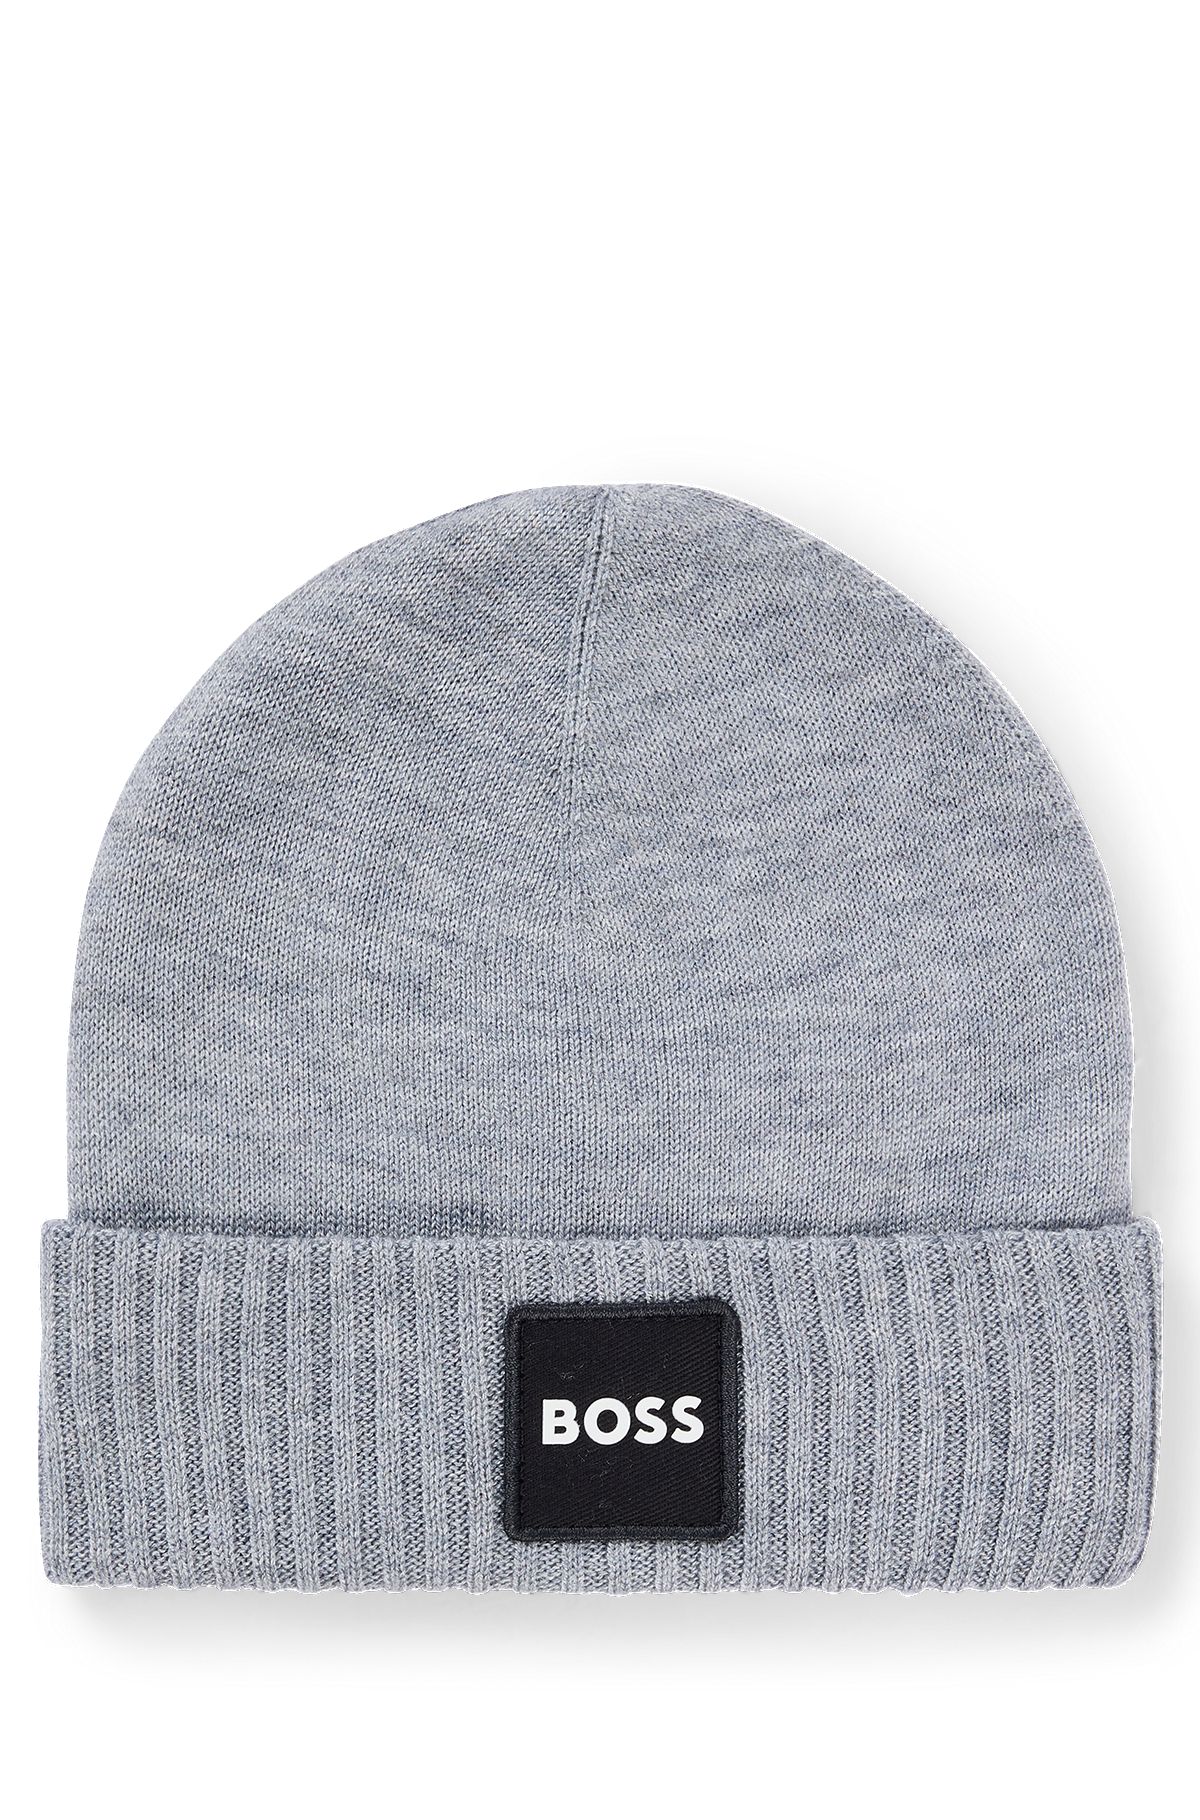 Kids' double-layer beanie hat with logo badge, Light Grey